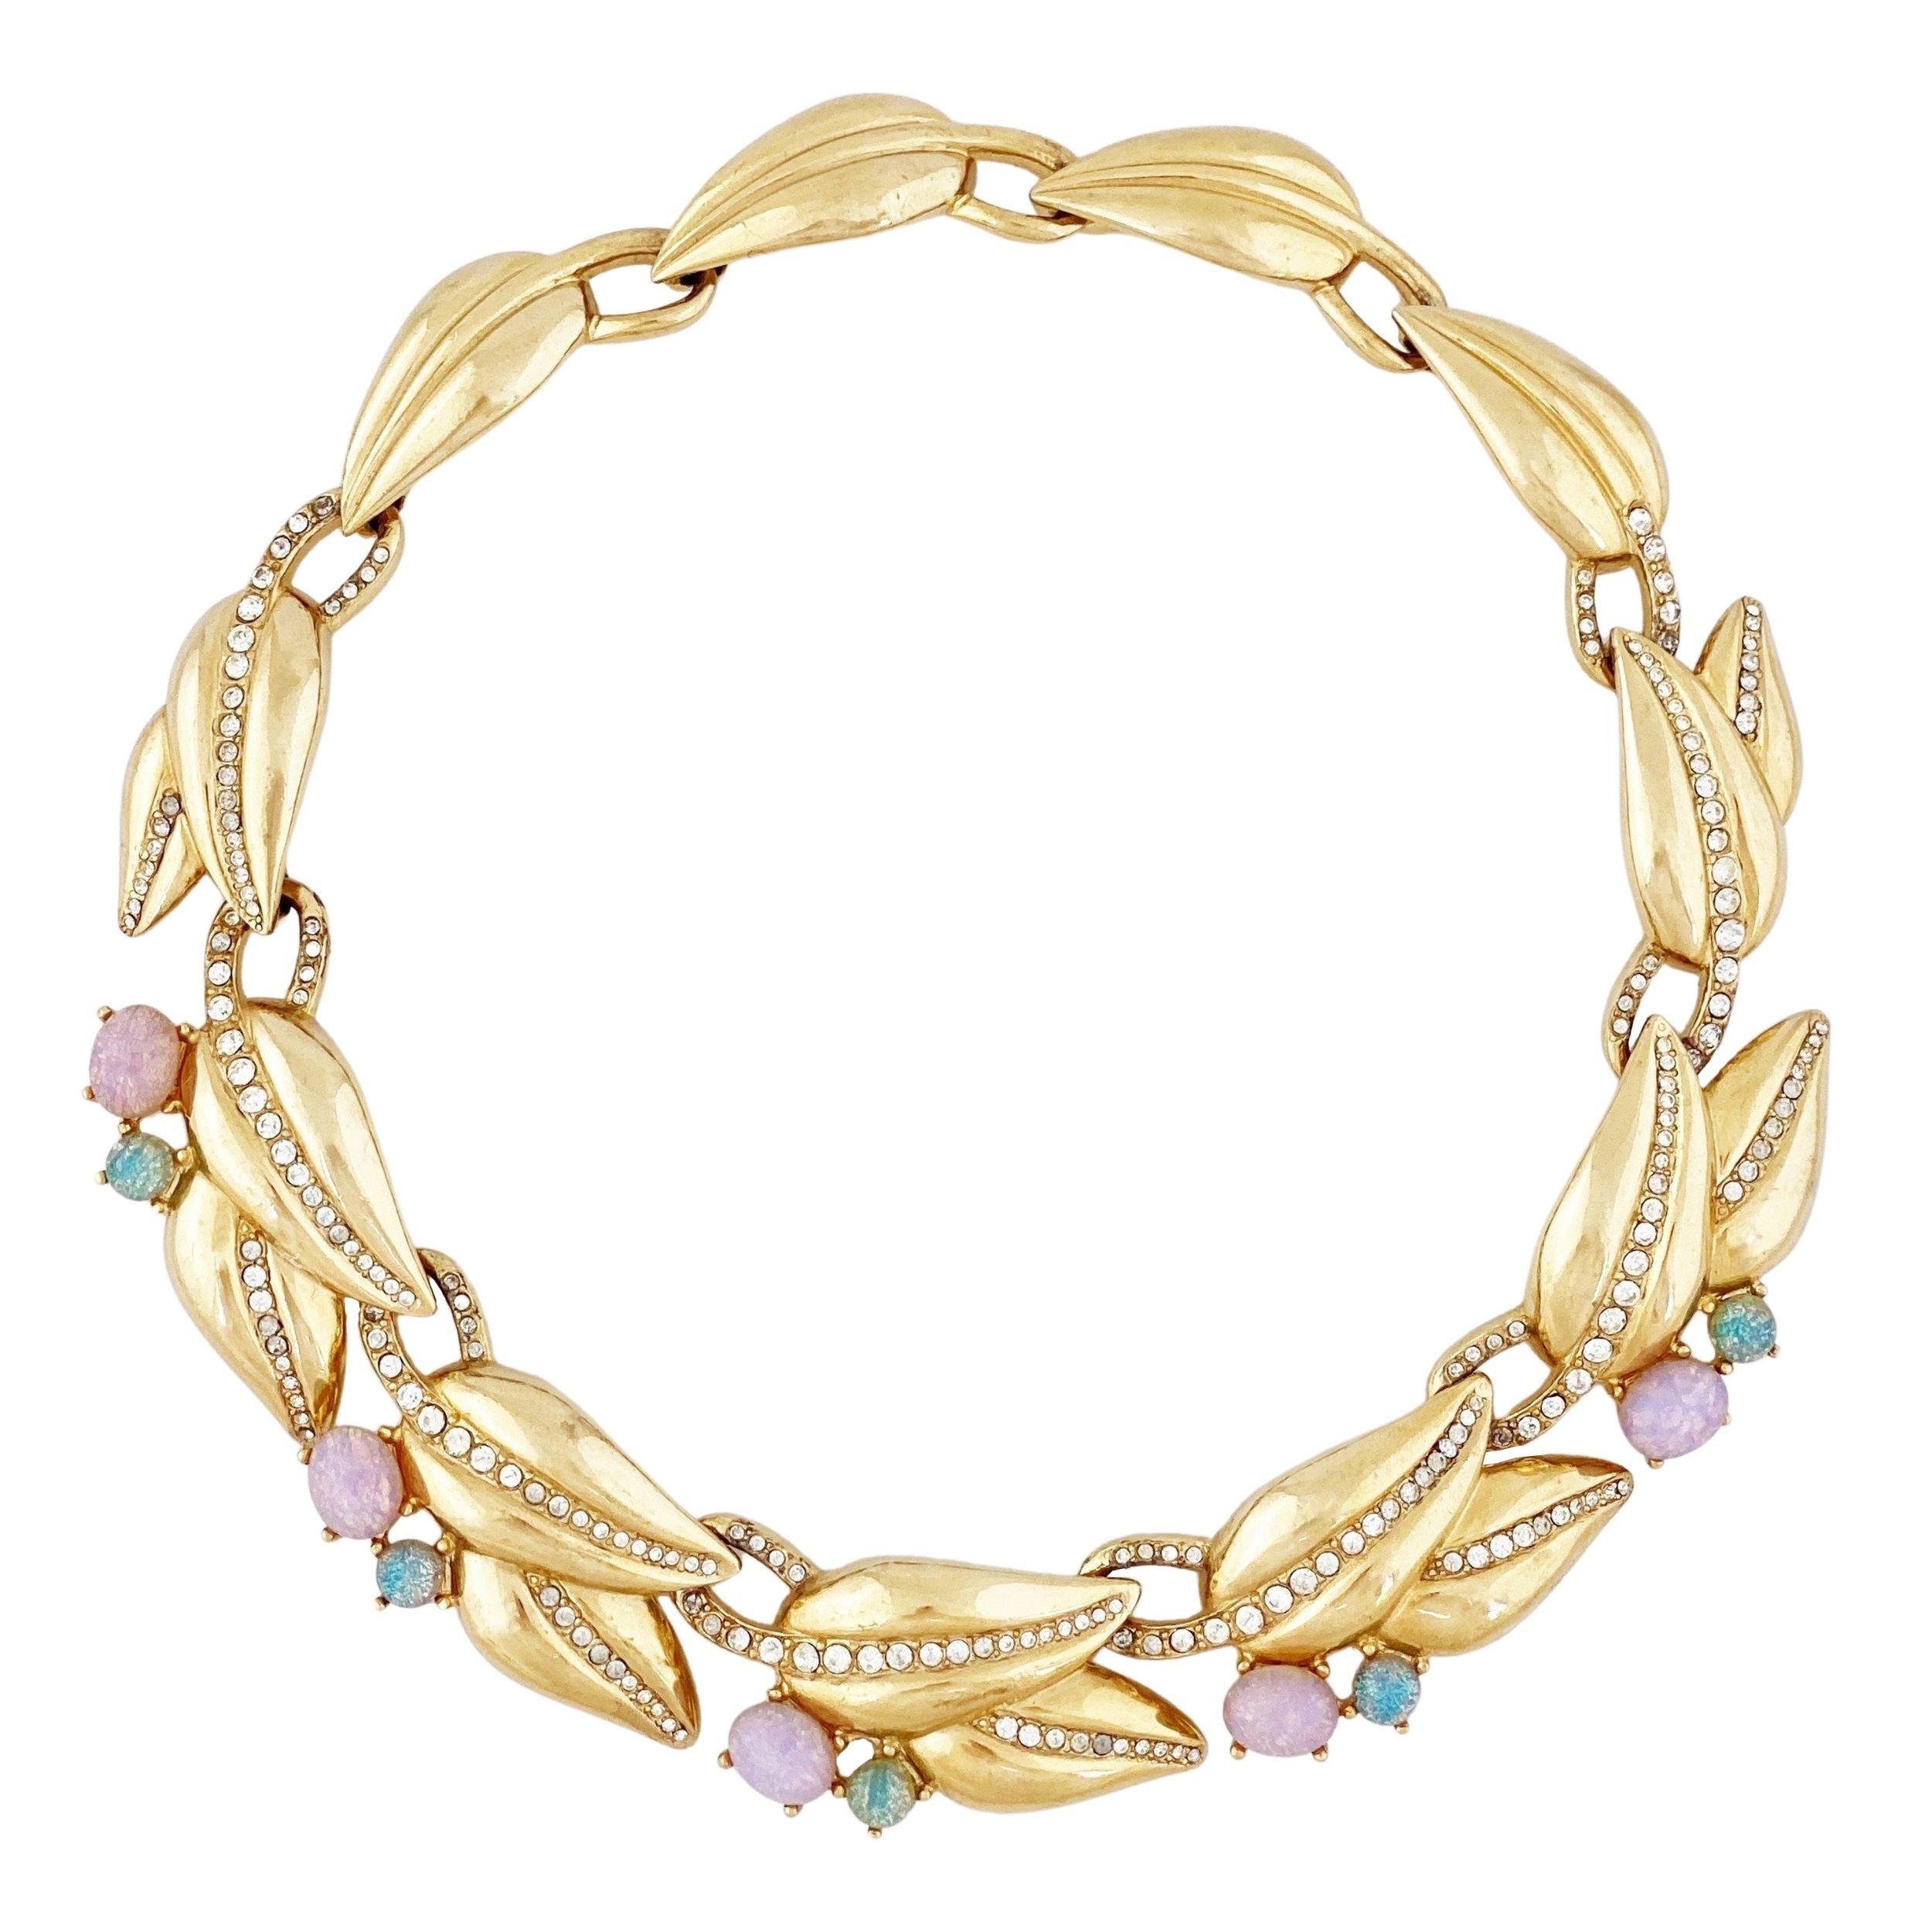 Gold Leaf Link Choker Necklace With Faux Opals By Givenchy, 1980s